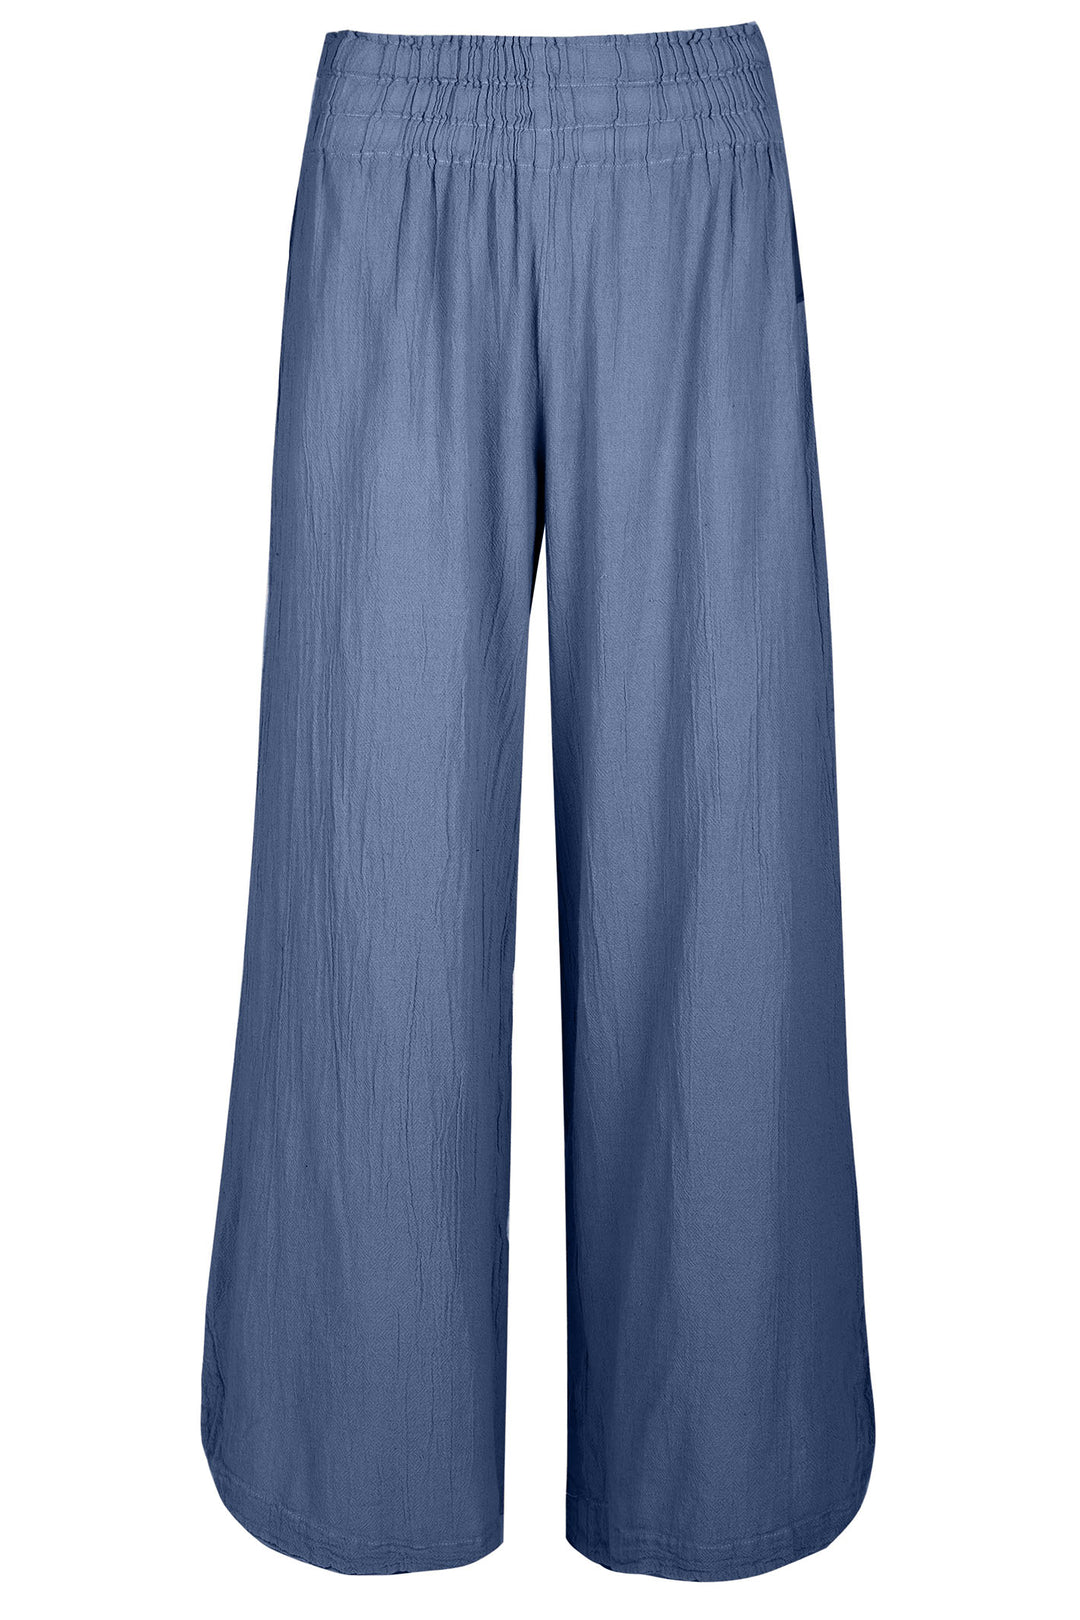 Onelife P609 Opalo Neptune Blue Wide Leg Flared Cotton Trousers - Experience Boutique